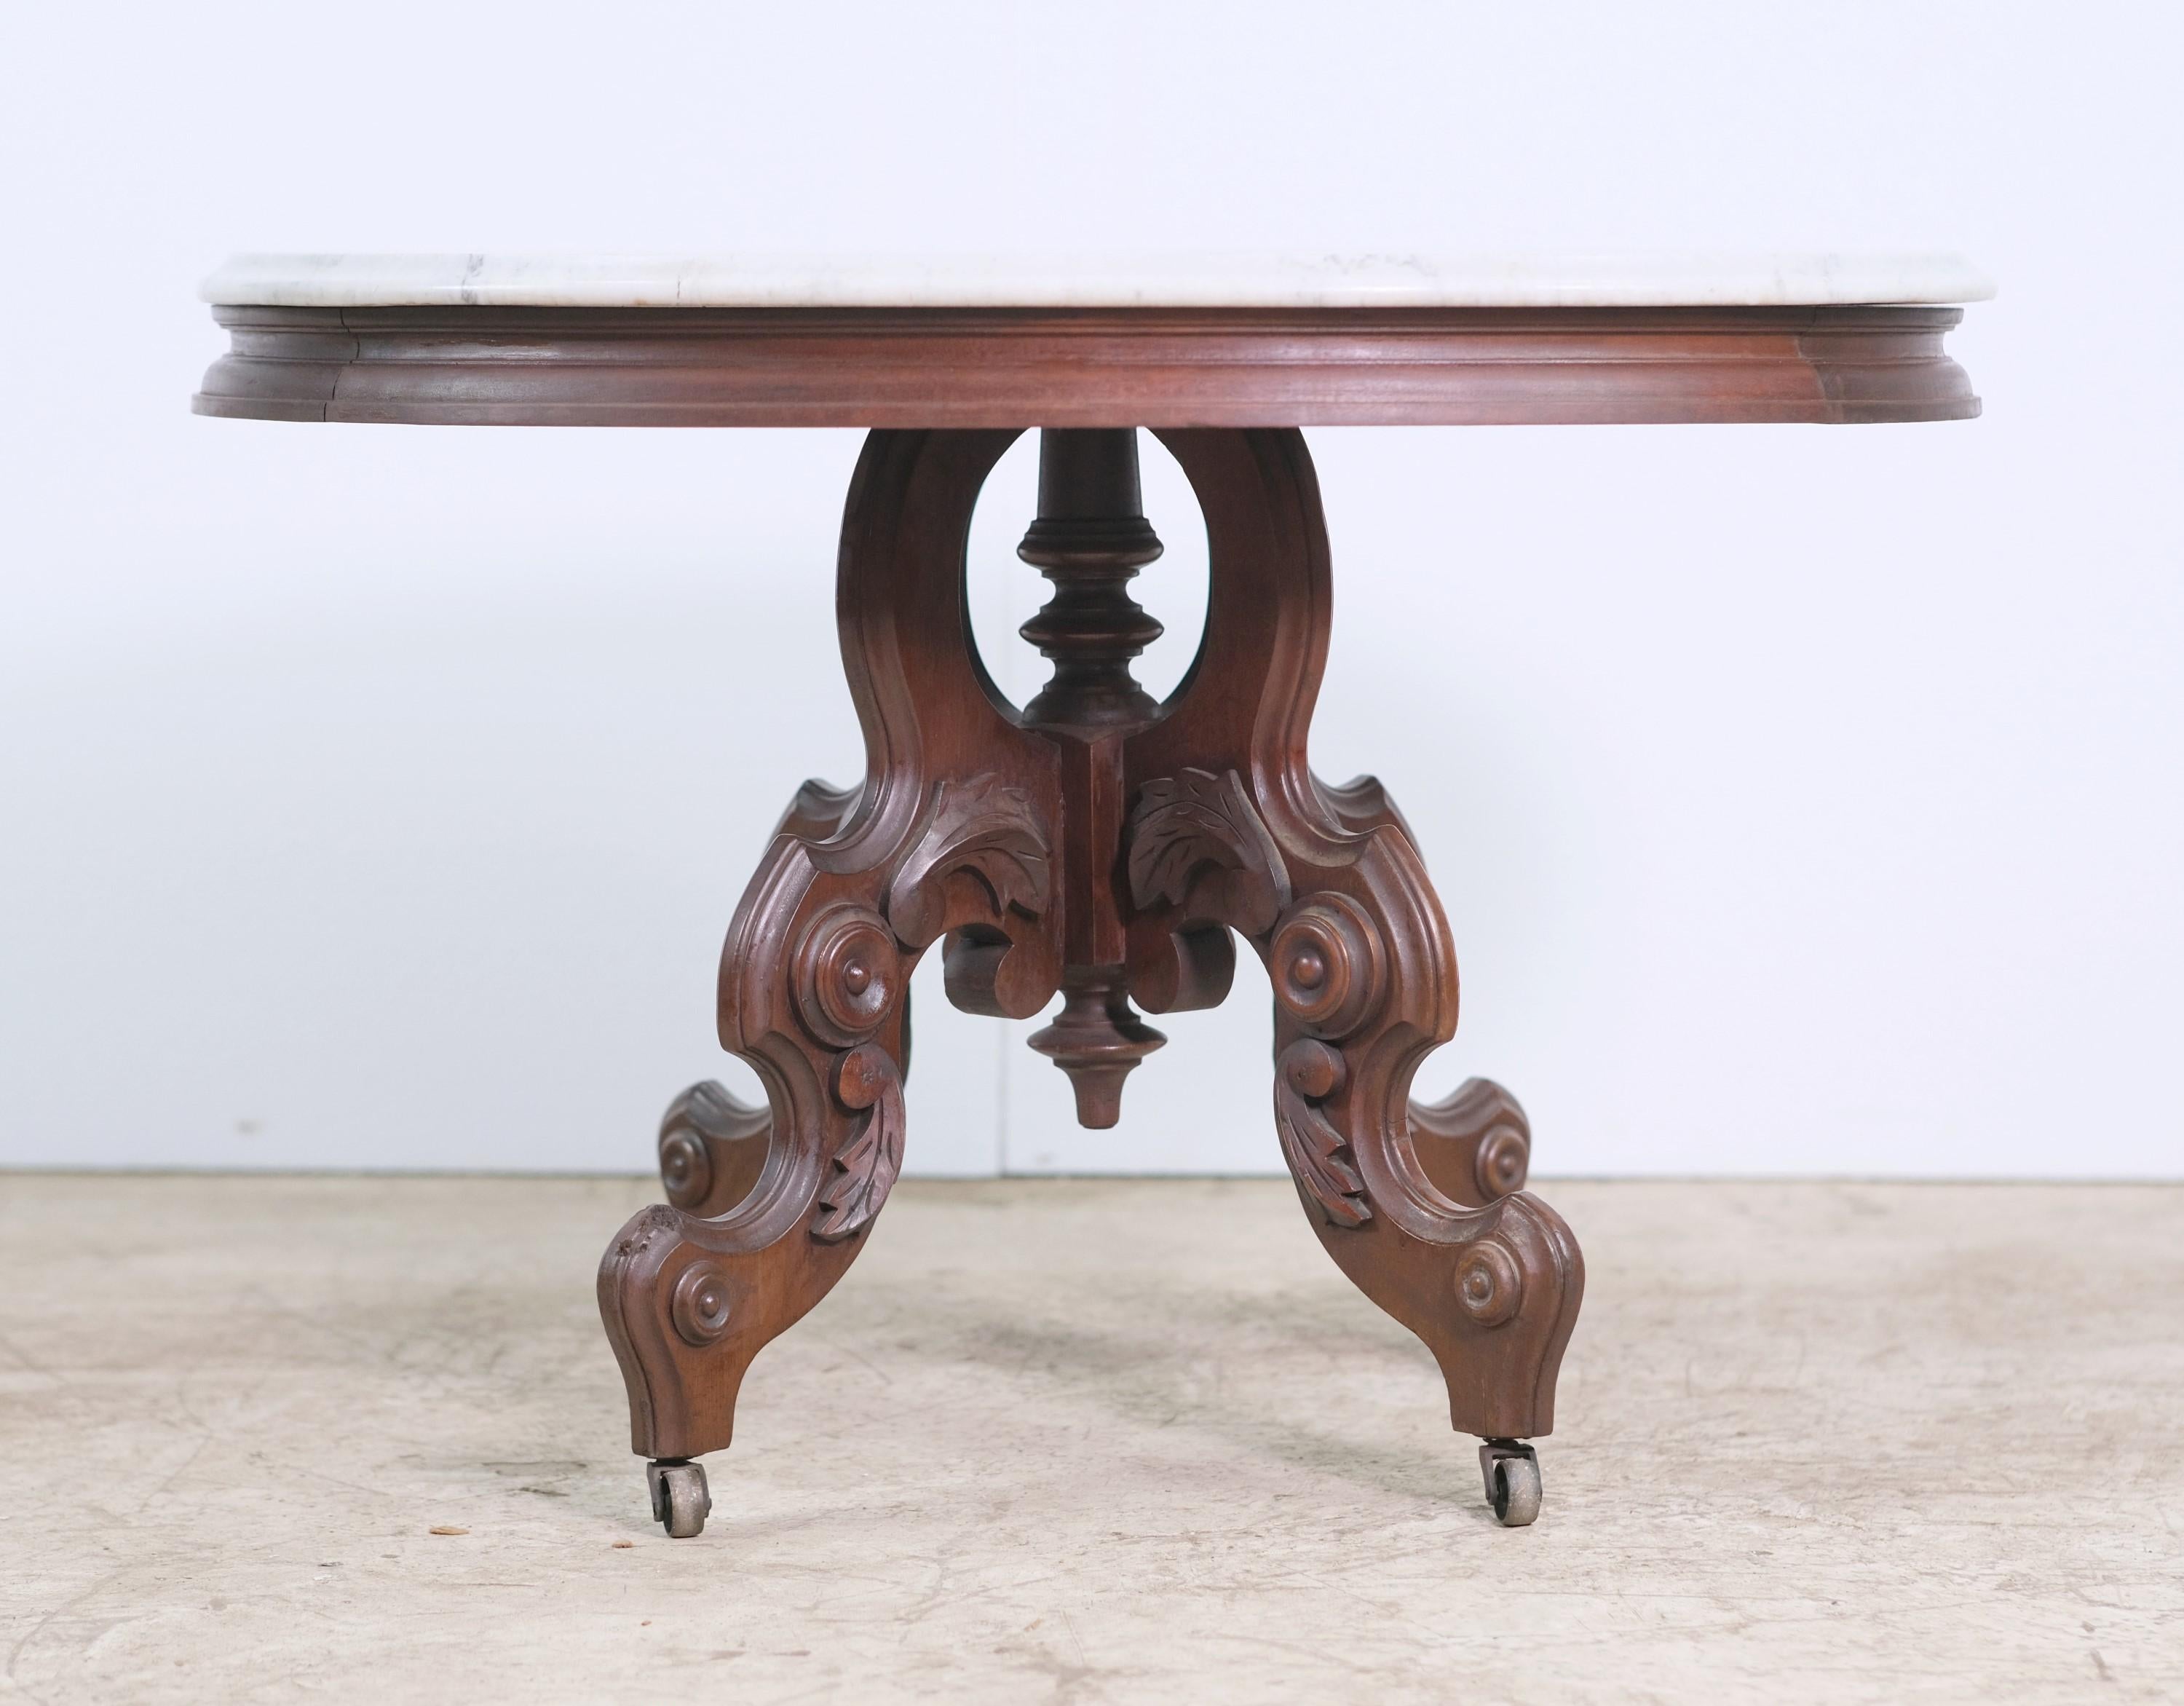 Early 20th century carved side table in an oval design. Features a white marble top with gray veining. Table base is done in a dark tone. Bulls eye details. Also this table features the original casters. This can be seen at our 400 Gilligan St